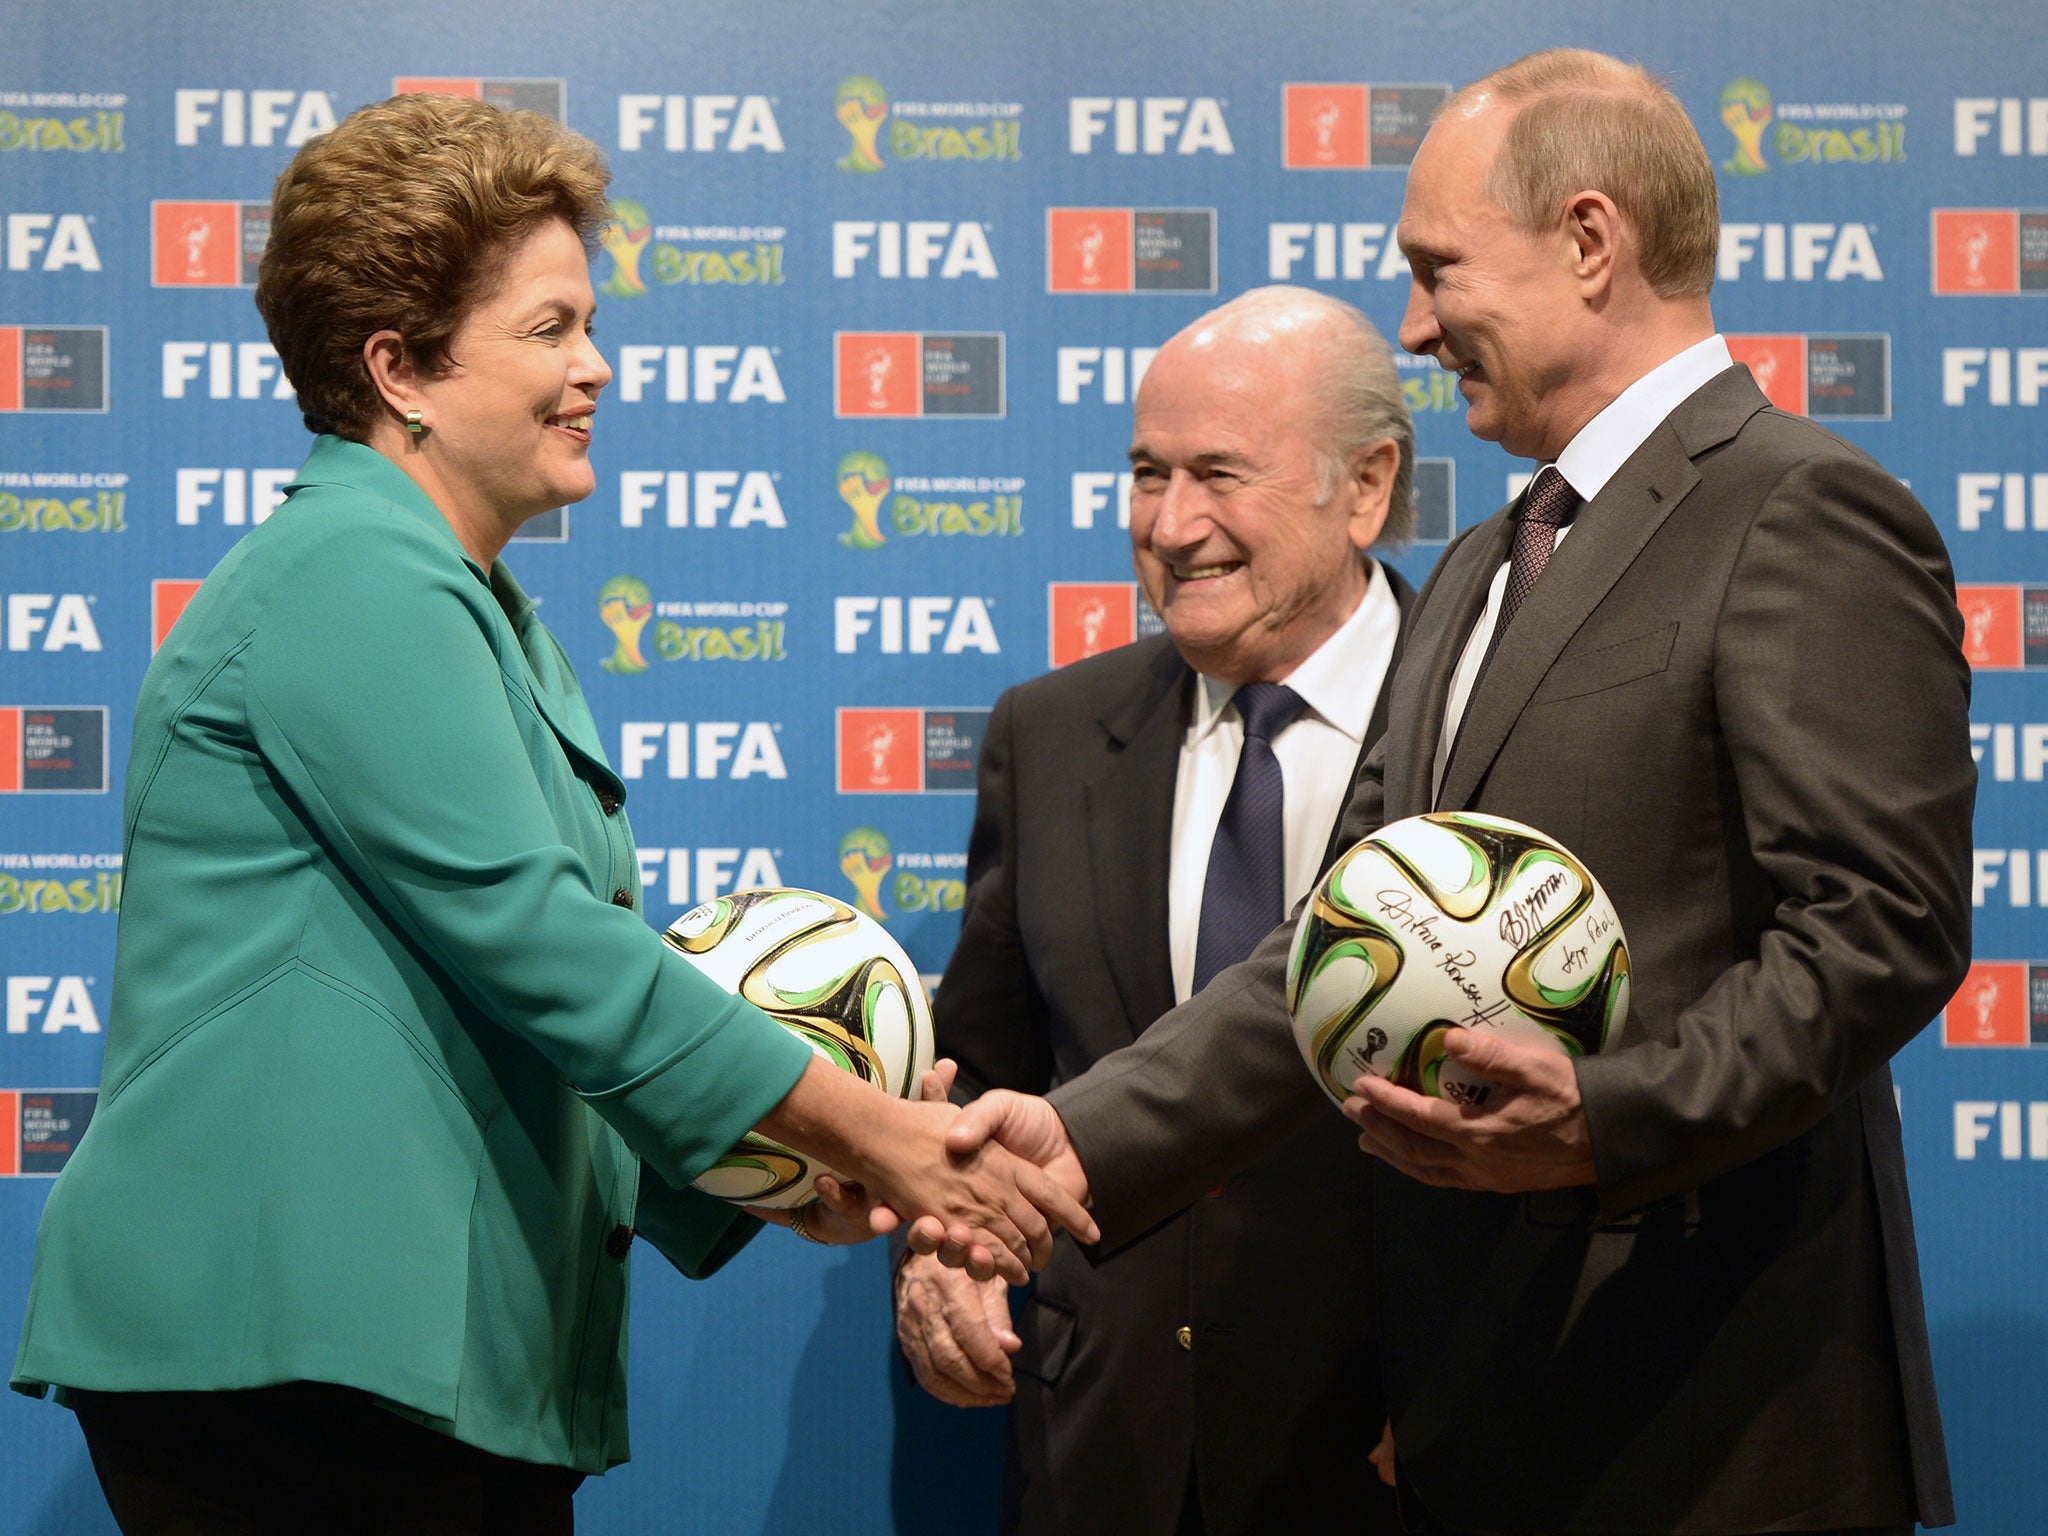 Who might replace Sepp Blatter?